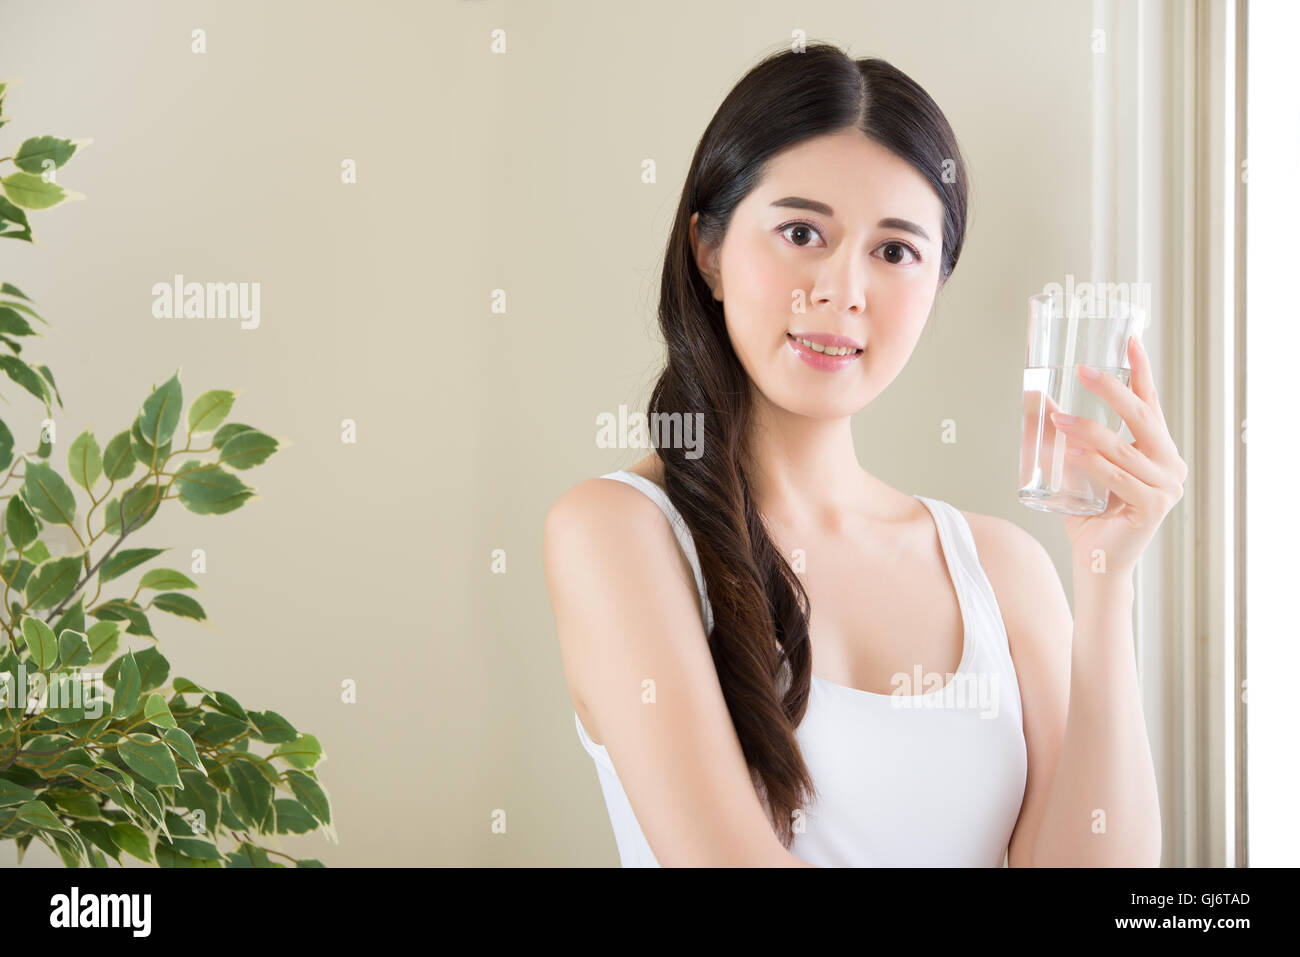 Drinking water is like washing out your insides. The water will cleanse the system, fill you up Stock Photo